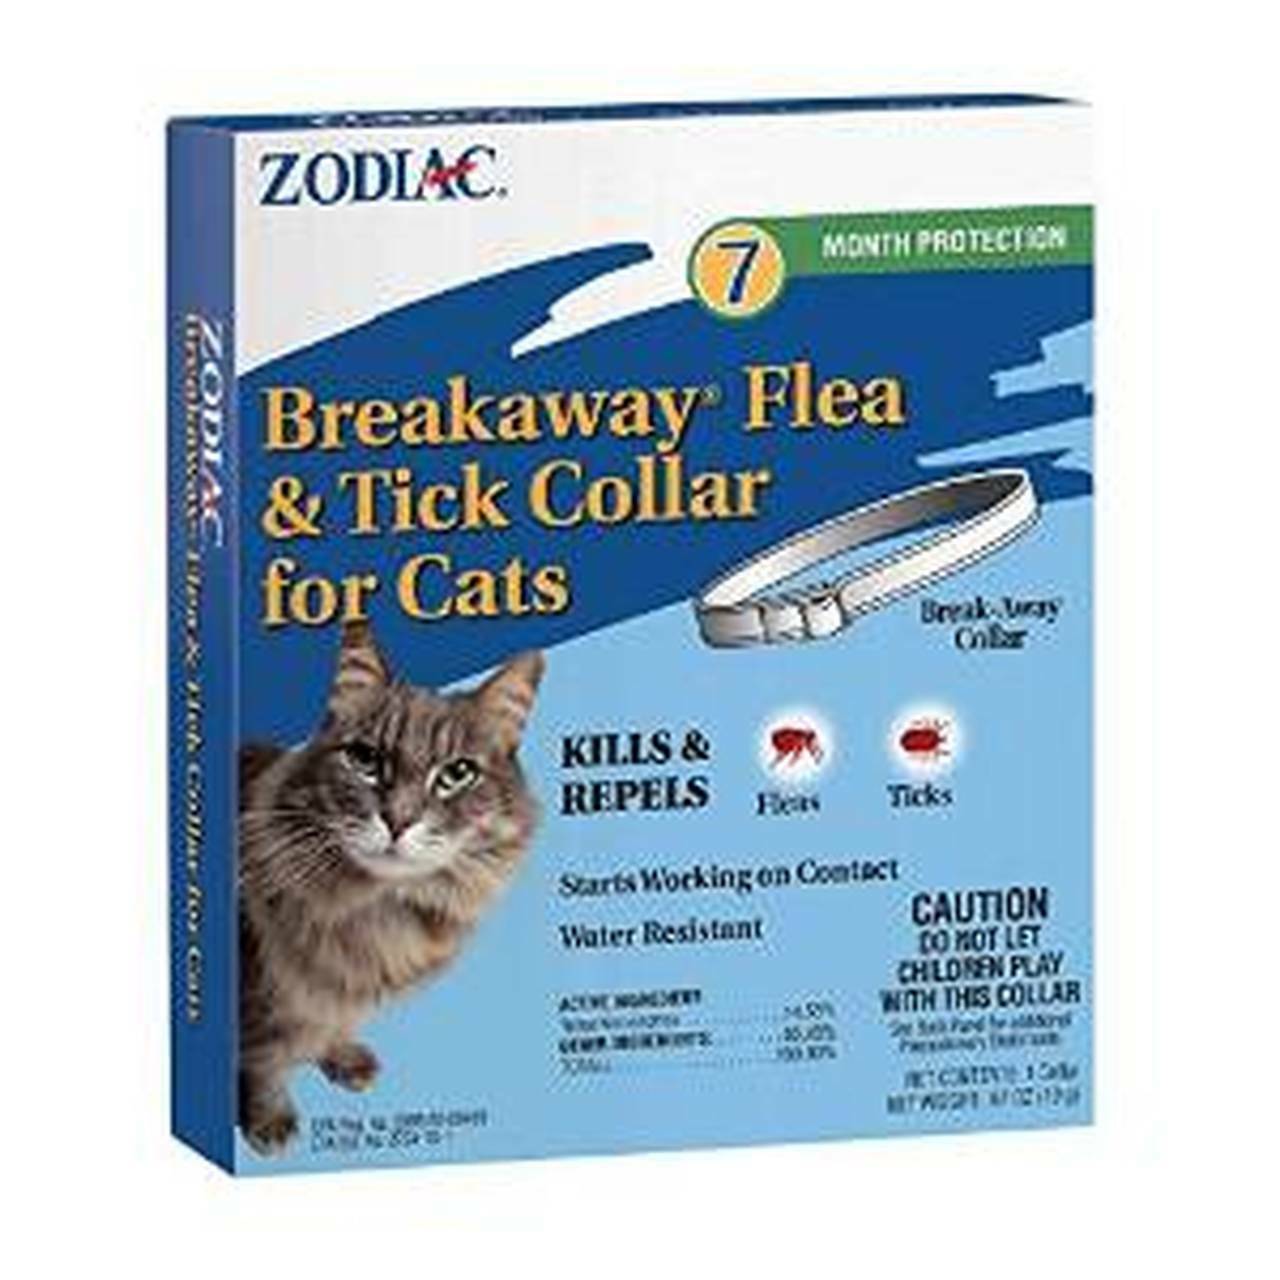 Zodiac Breakaway Flea & Tick Collar For Cats 7 Month Protection  (free Shipping)